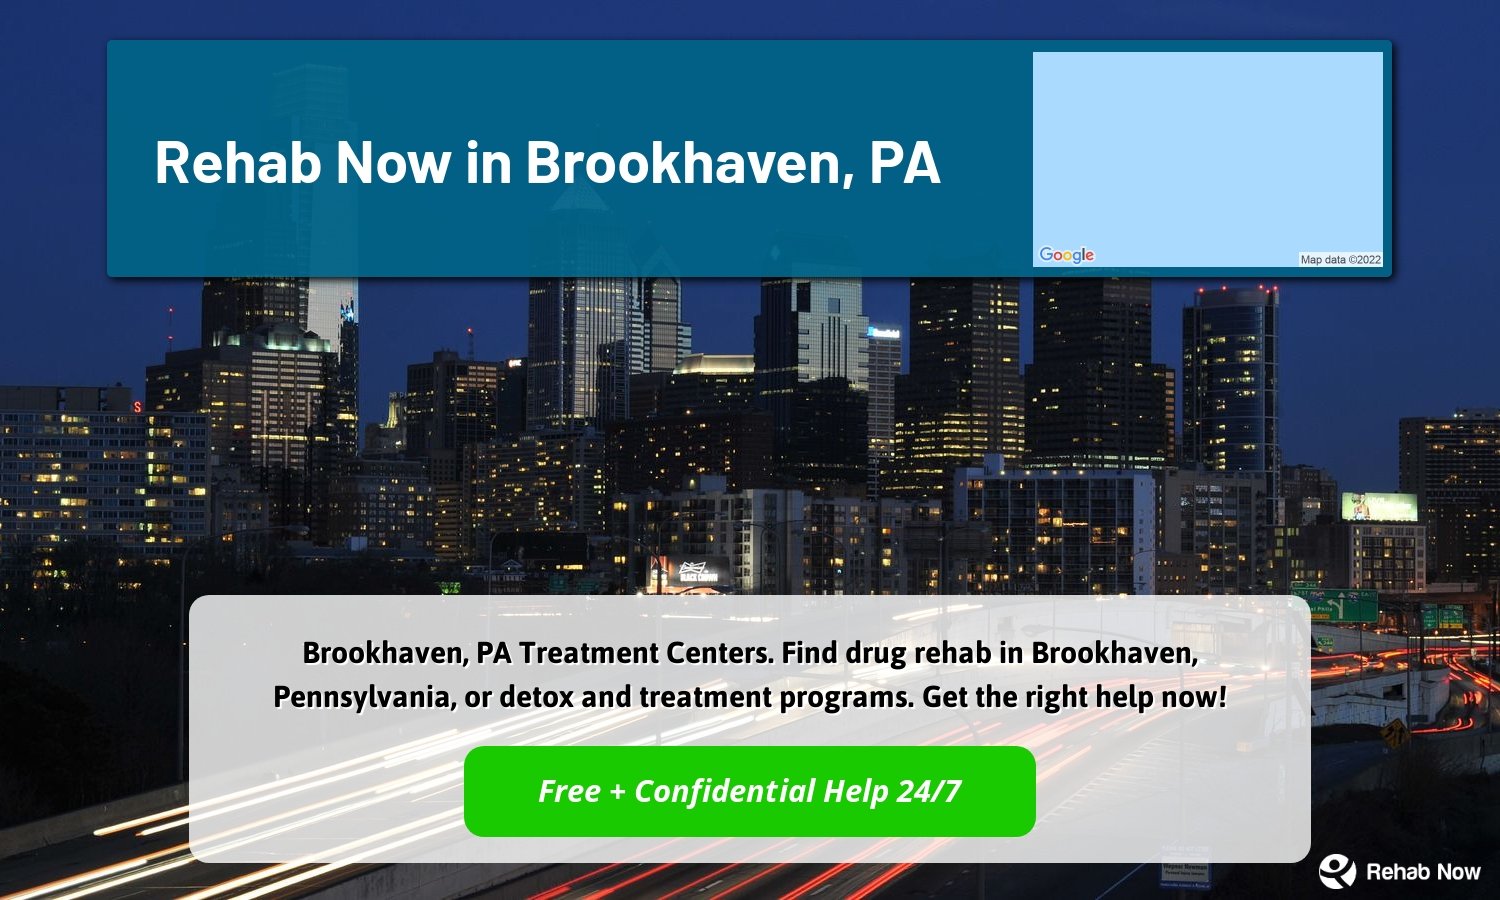 Brookhaven, PA Treatment Centers. Find drug rehab in Brookhaven, Pennsylvania, or detox and treatment programs. Get the right help now!